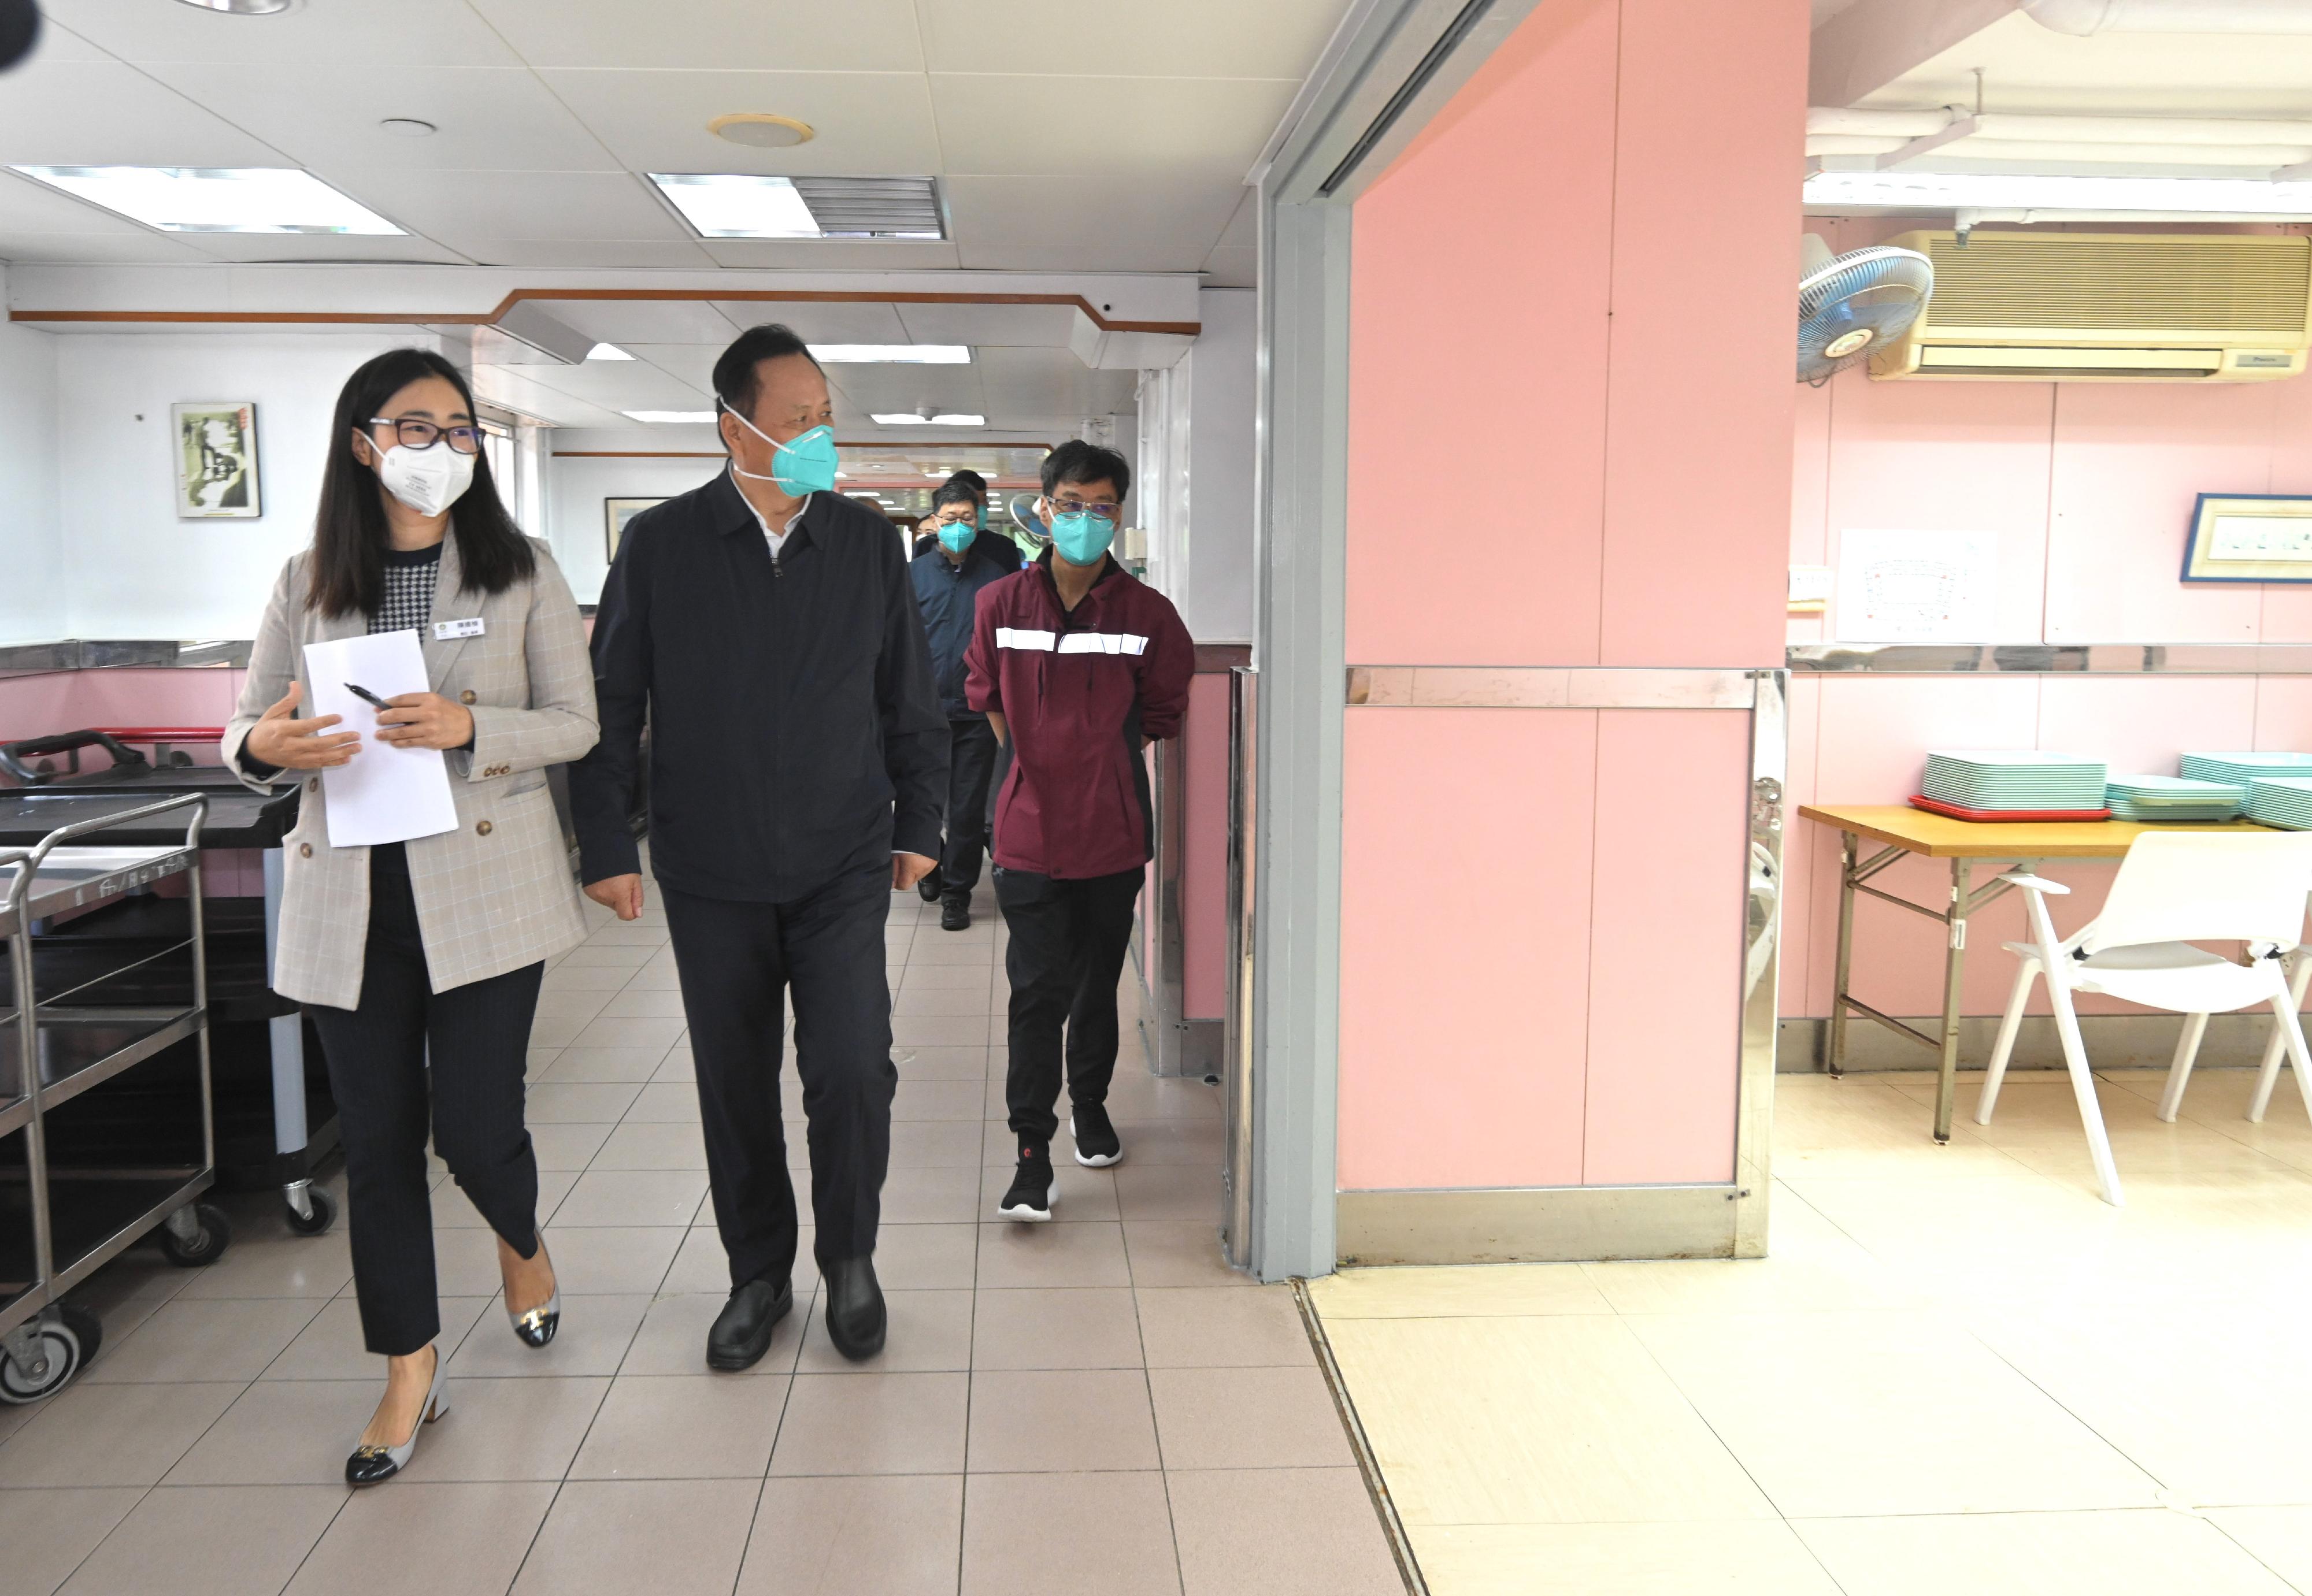 The expert group led by the Leader of the Mainland Chinese medicine expert group of the Central Authorities, Mr Tong Xiaolin, today (April 2) visited two residential care homes for the elderly to learn about how they responded to the fifth wave of the epidemic.